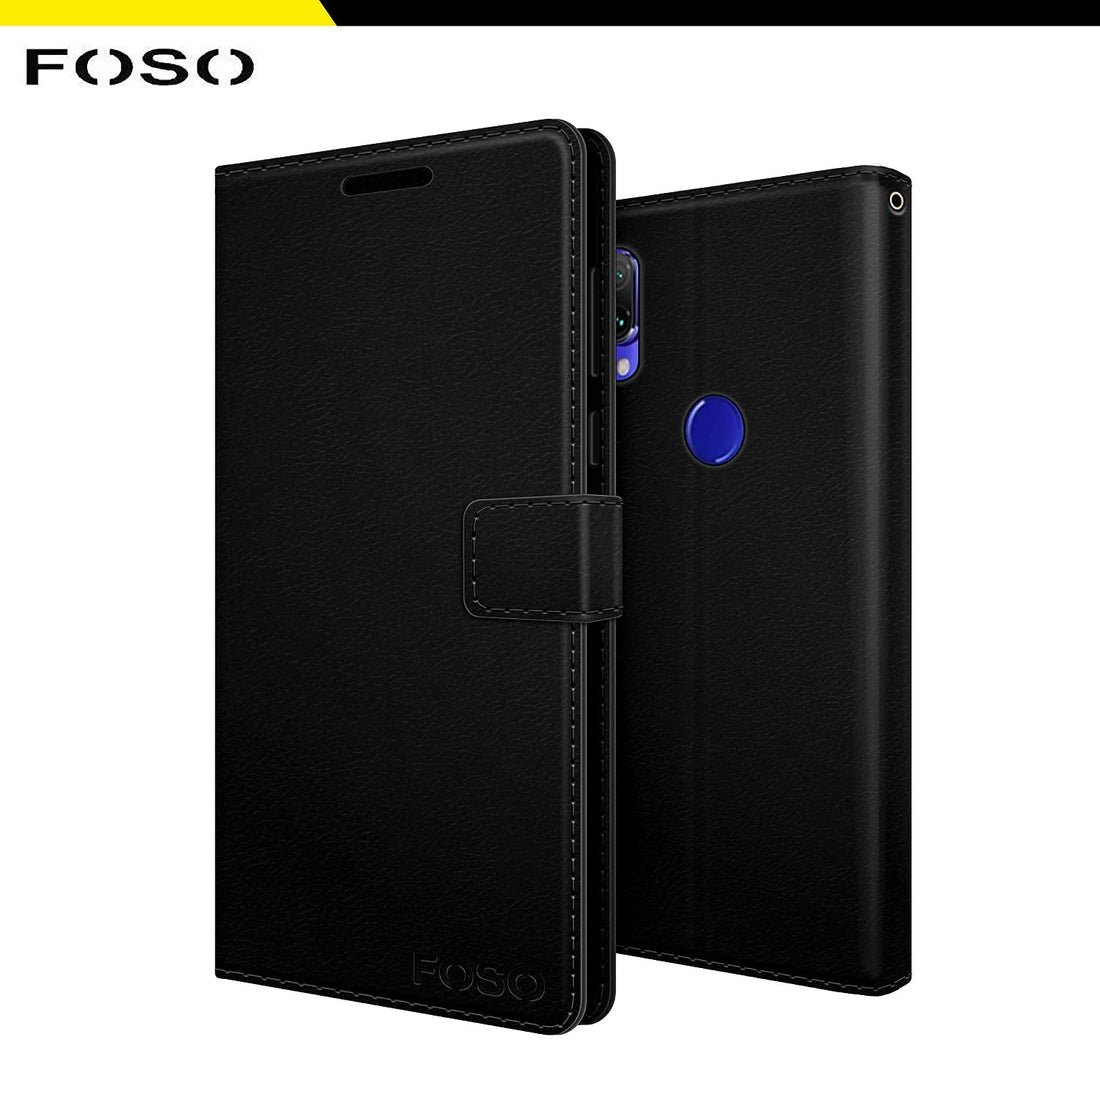 Foso  Back Cover Case for Redmi Note 7 / Note 7 Pro/Note 7S (PU Leather Black)